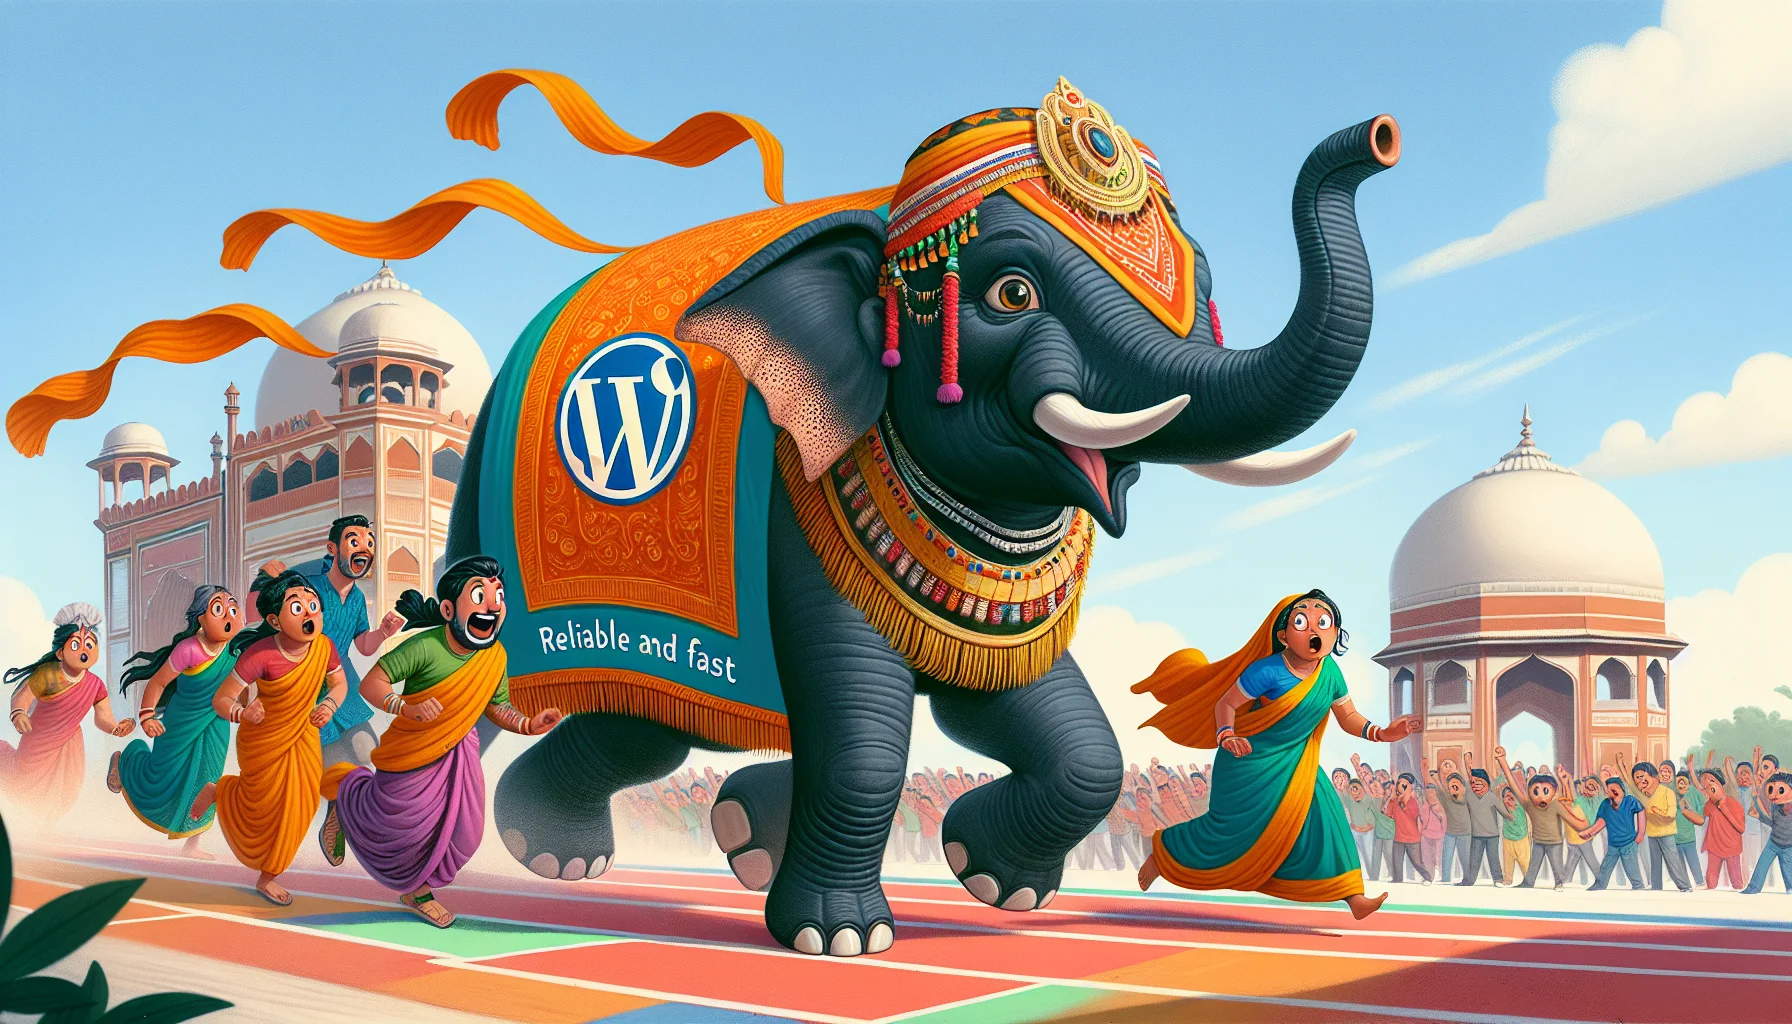 Create a lighthearted and engaging scene set in India, showcasing an imaginative personification of Wordpress hosting. Picture it as a reliable and fast elephant, with the logo on its side, draped in beautiful traditional Indian fabric. It's in a race with other animals embodying other types of web hosting. The elephant confidently strides ahead, as surprised onlookers—a South Asian male and Middle-Eastern female web developers—cheer it on. The setting is an expansive, colorful digital landscape, symbolizing the internet, with iconic Indian architecture in the background.